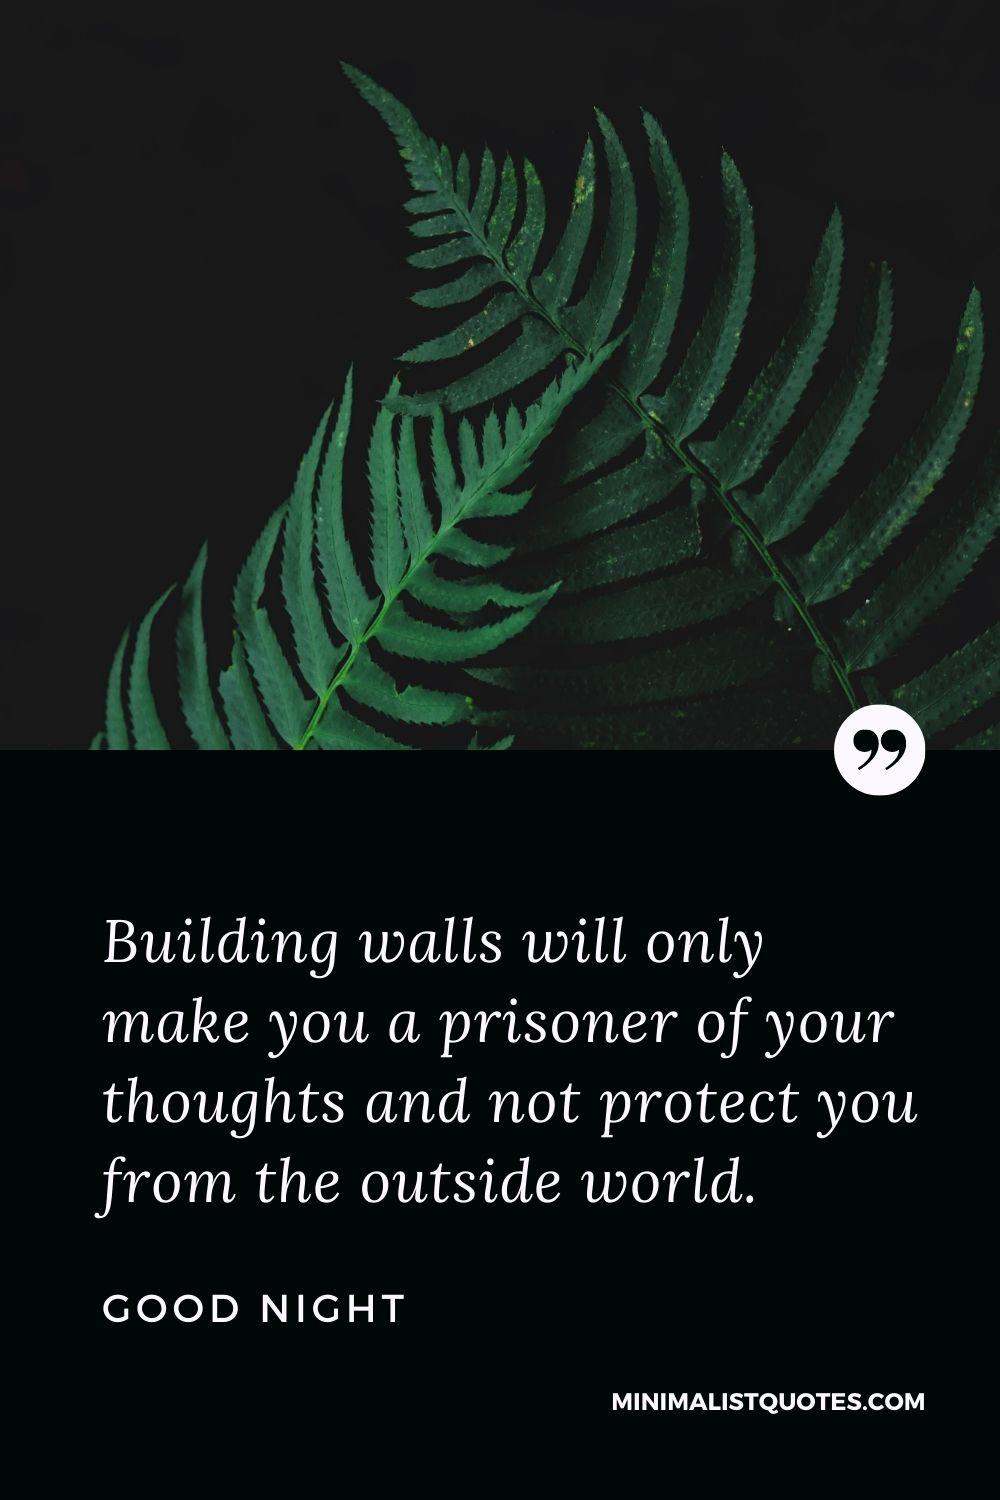 Good Night Wishes - Building walls will only make you a prisoner of your thoughts and not protect you from the outside world.